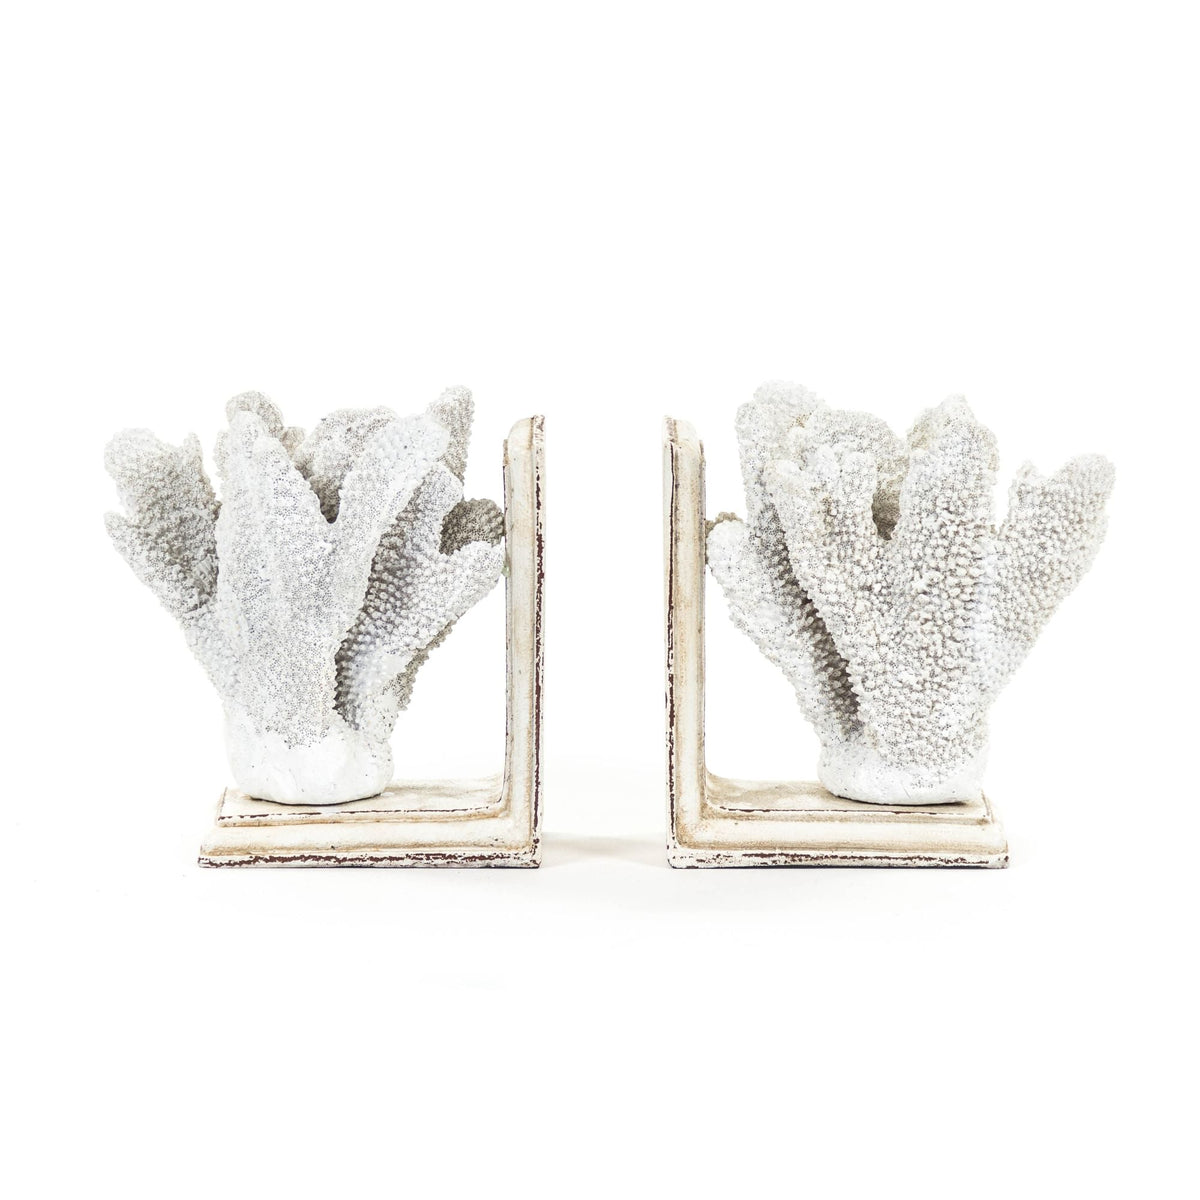 White Coral Bookends by Zentique